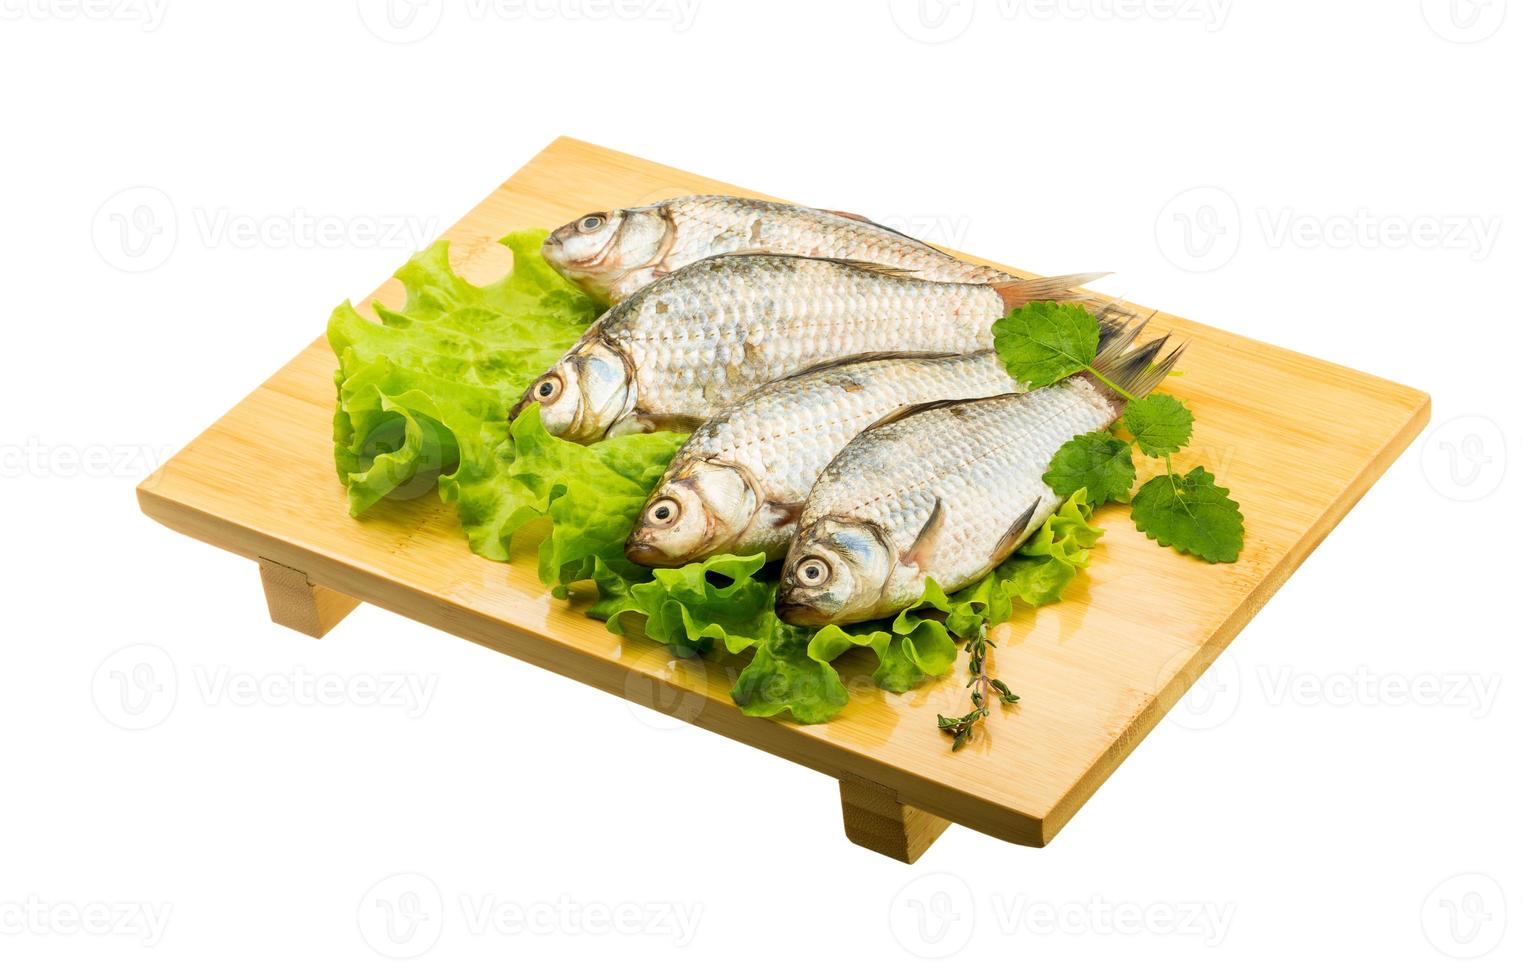 Crucian fish on wooden board and white background photo